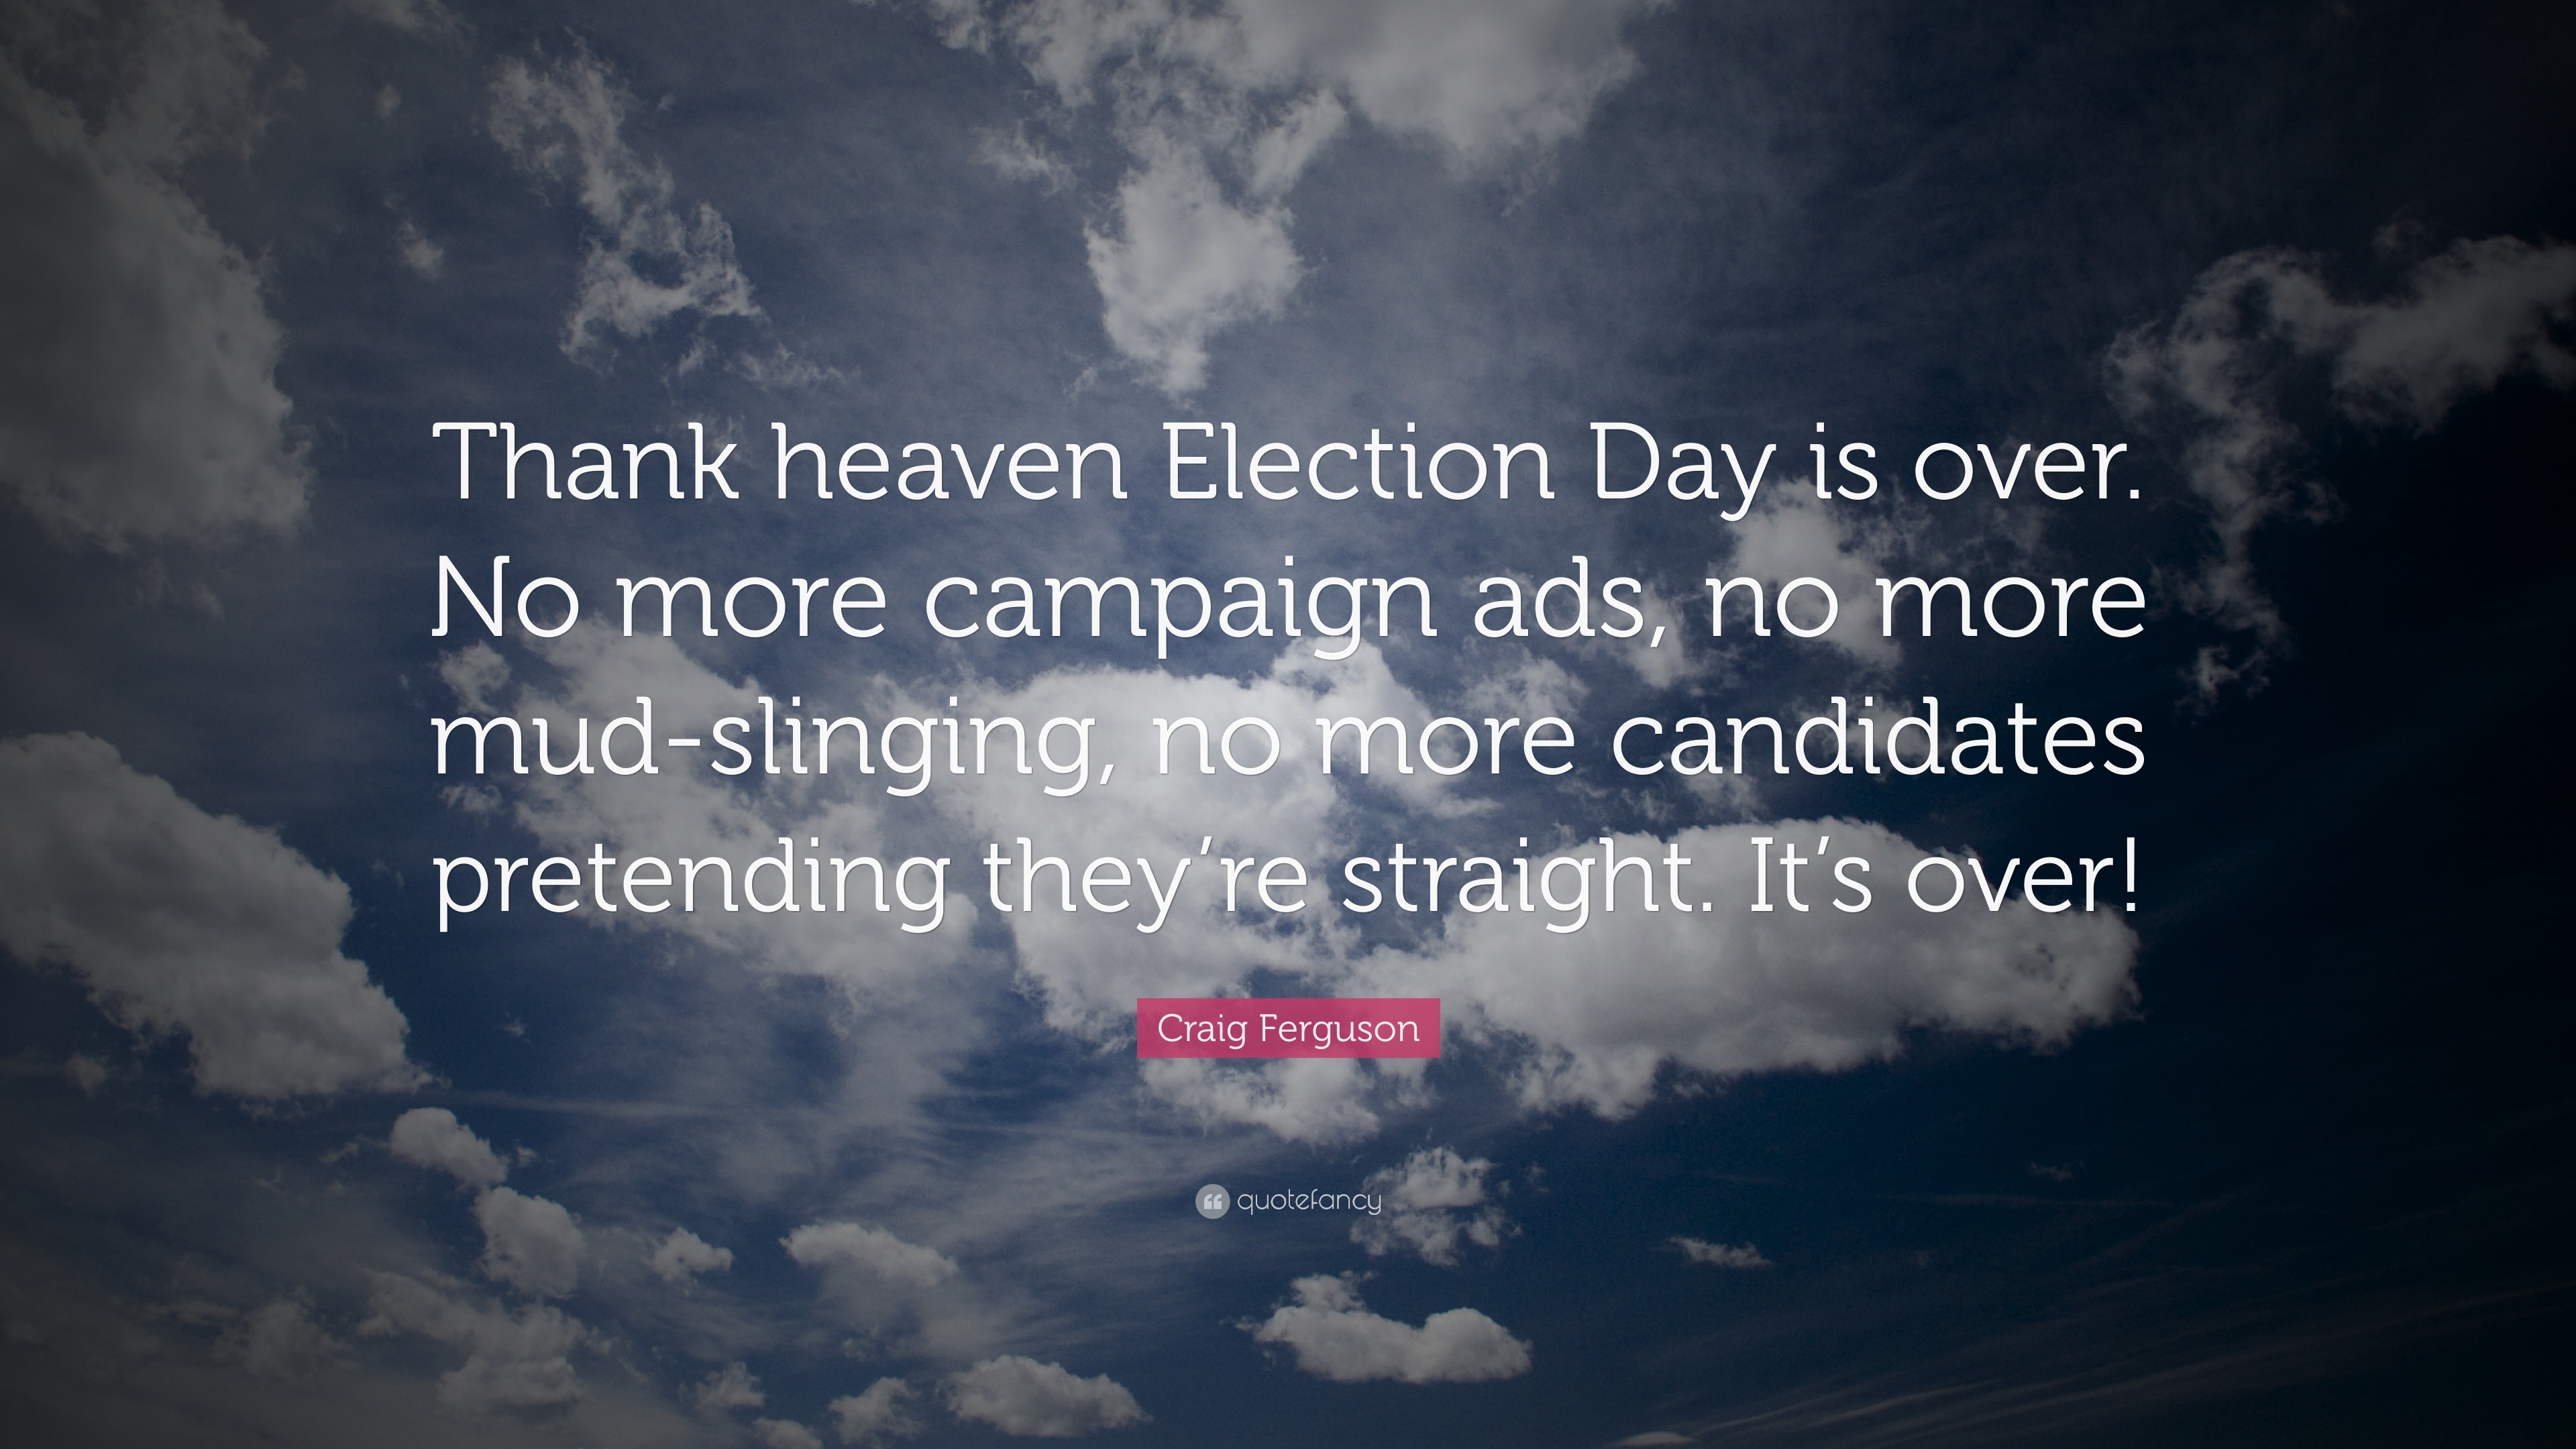 3840x2160 Craig Ferguson Quote: “Thank heaven Election Day is over. No more campaign  ads